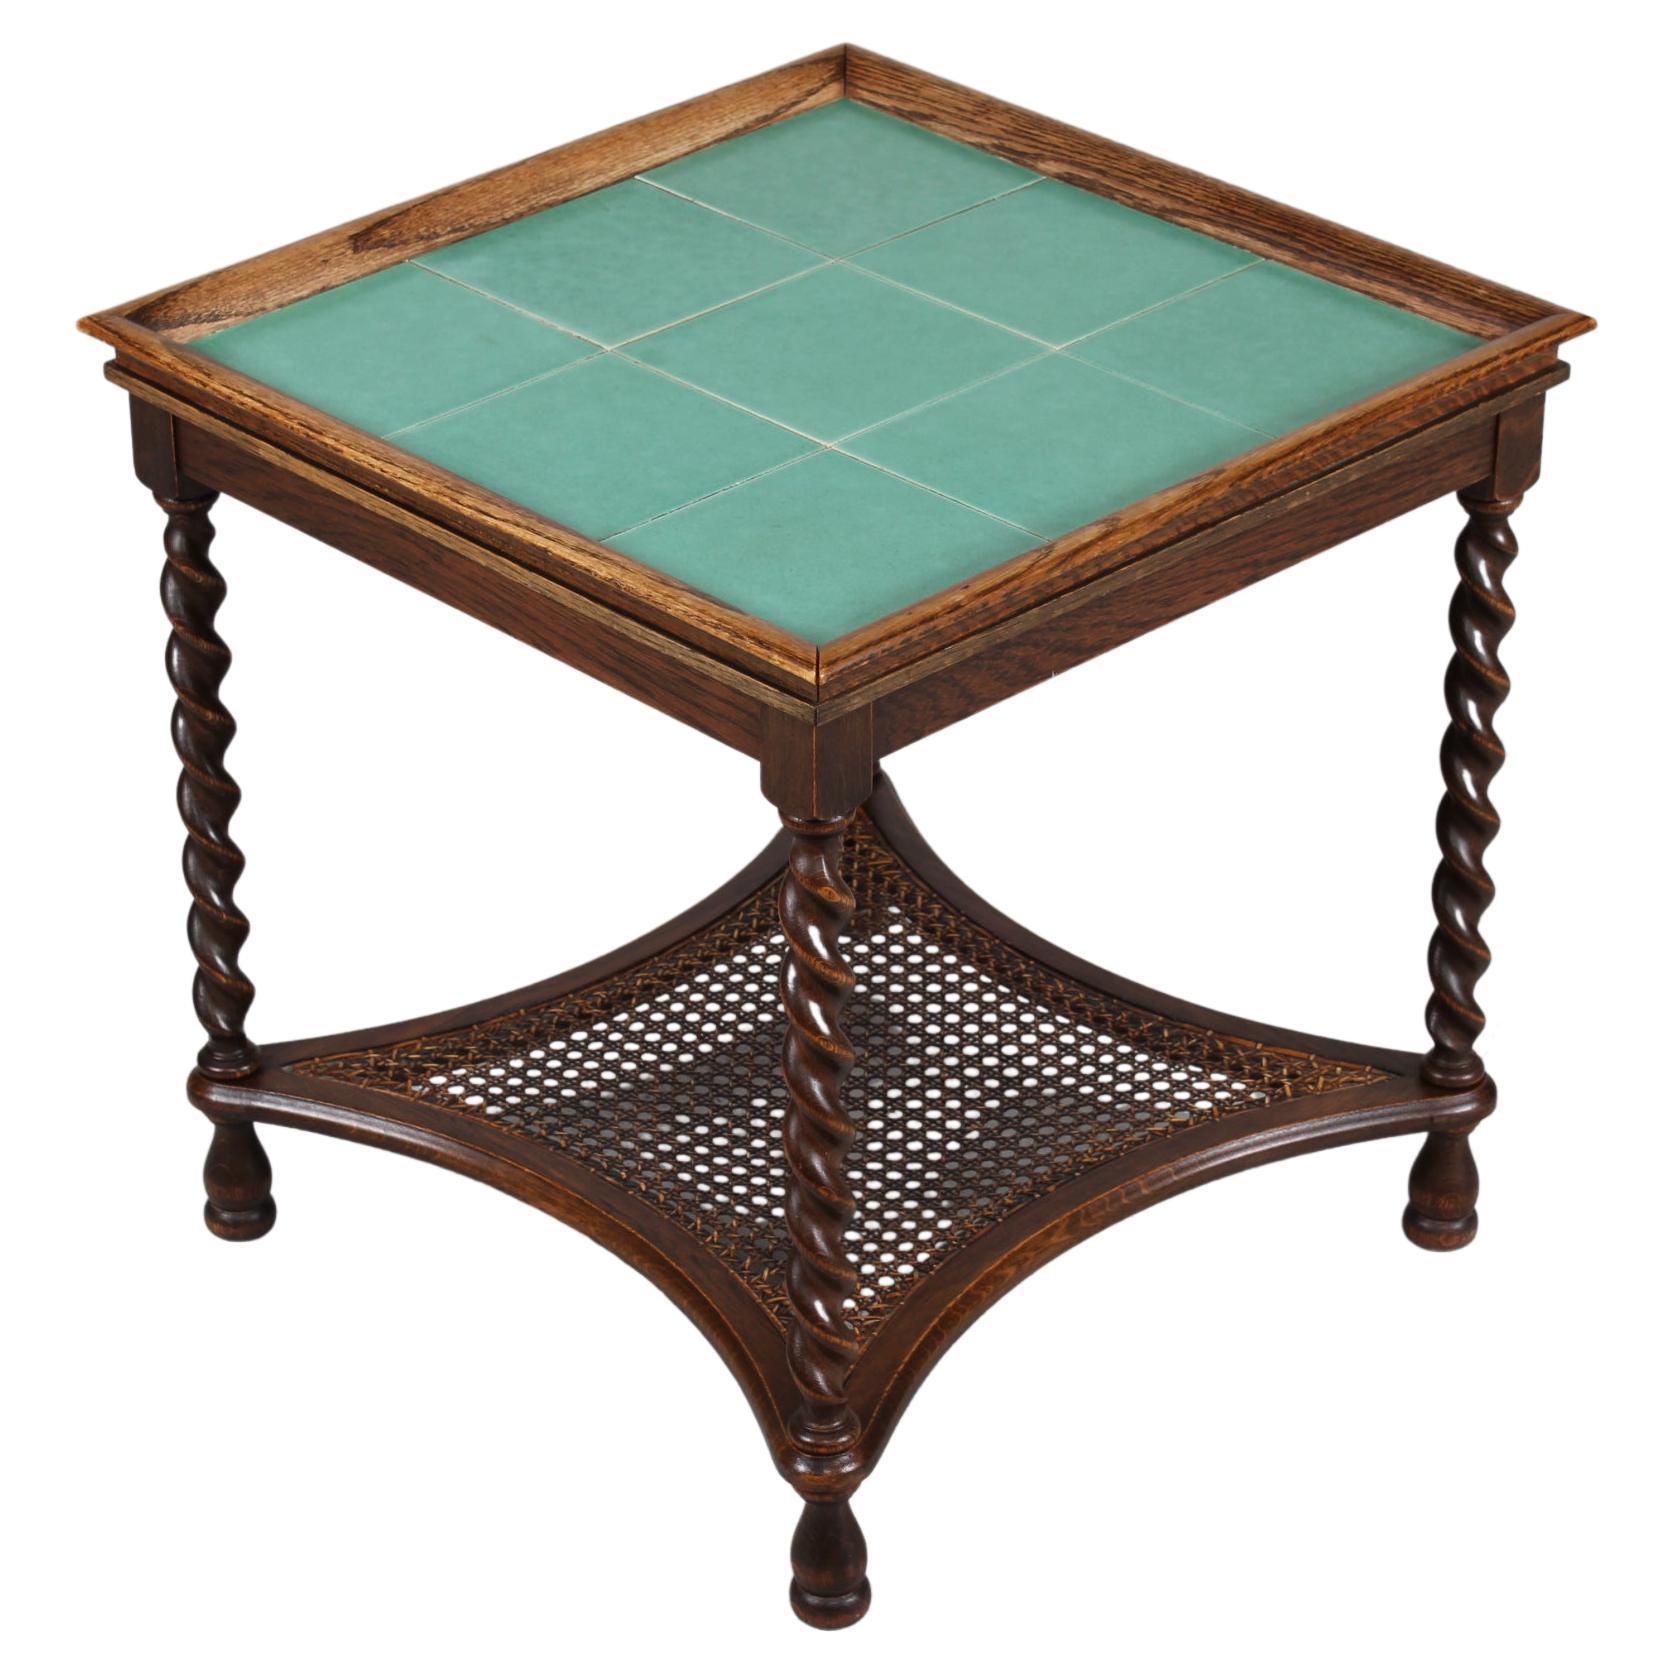 Glazed Art Deco Side Table with Jade Green Tiles by Danish Cabinetmaker, 1930-1940s